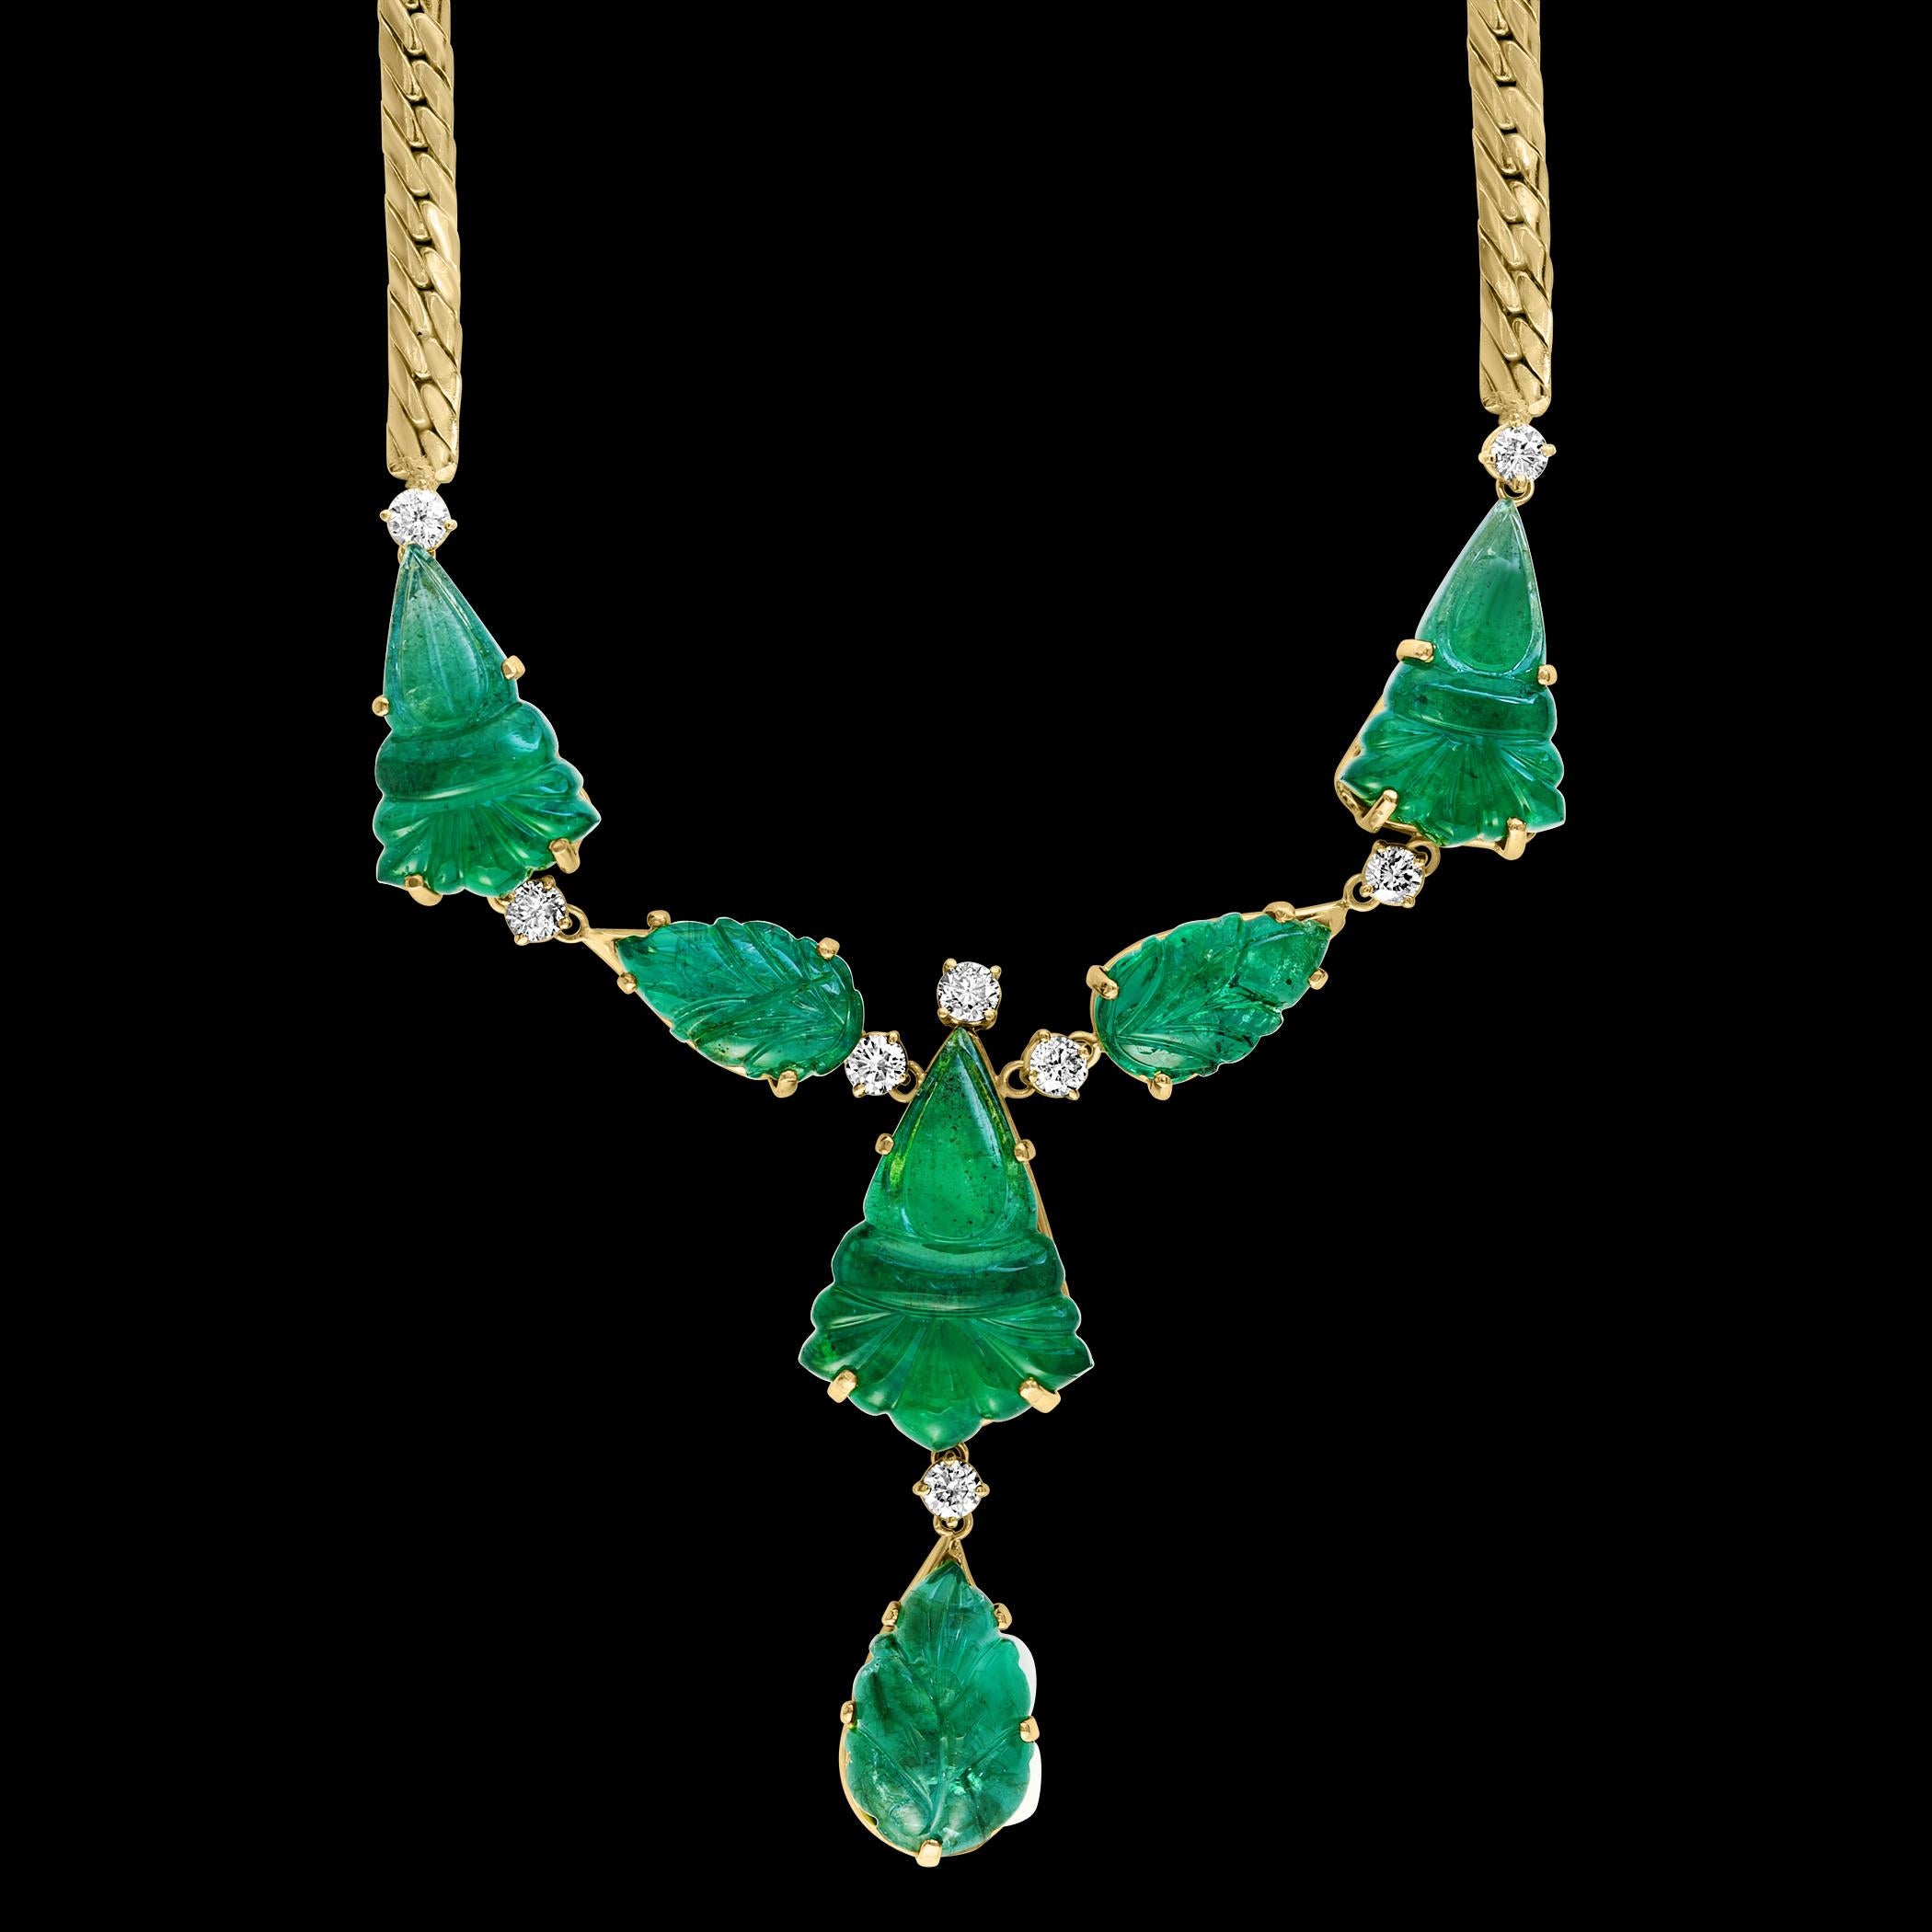 115 Ct Natural Carved Drop Emerald & 4 Ct Diamond  Necklace 18 Kt Gold Necklace For Sale 11